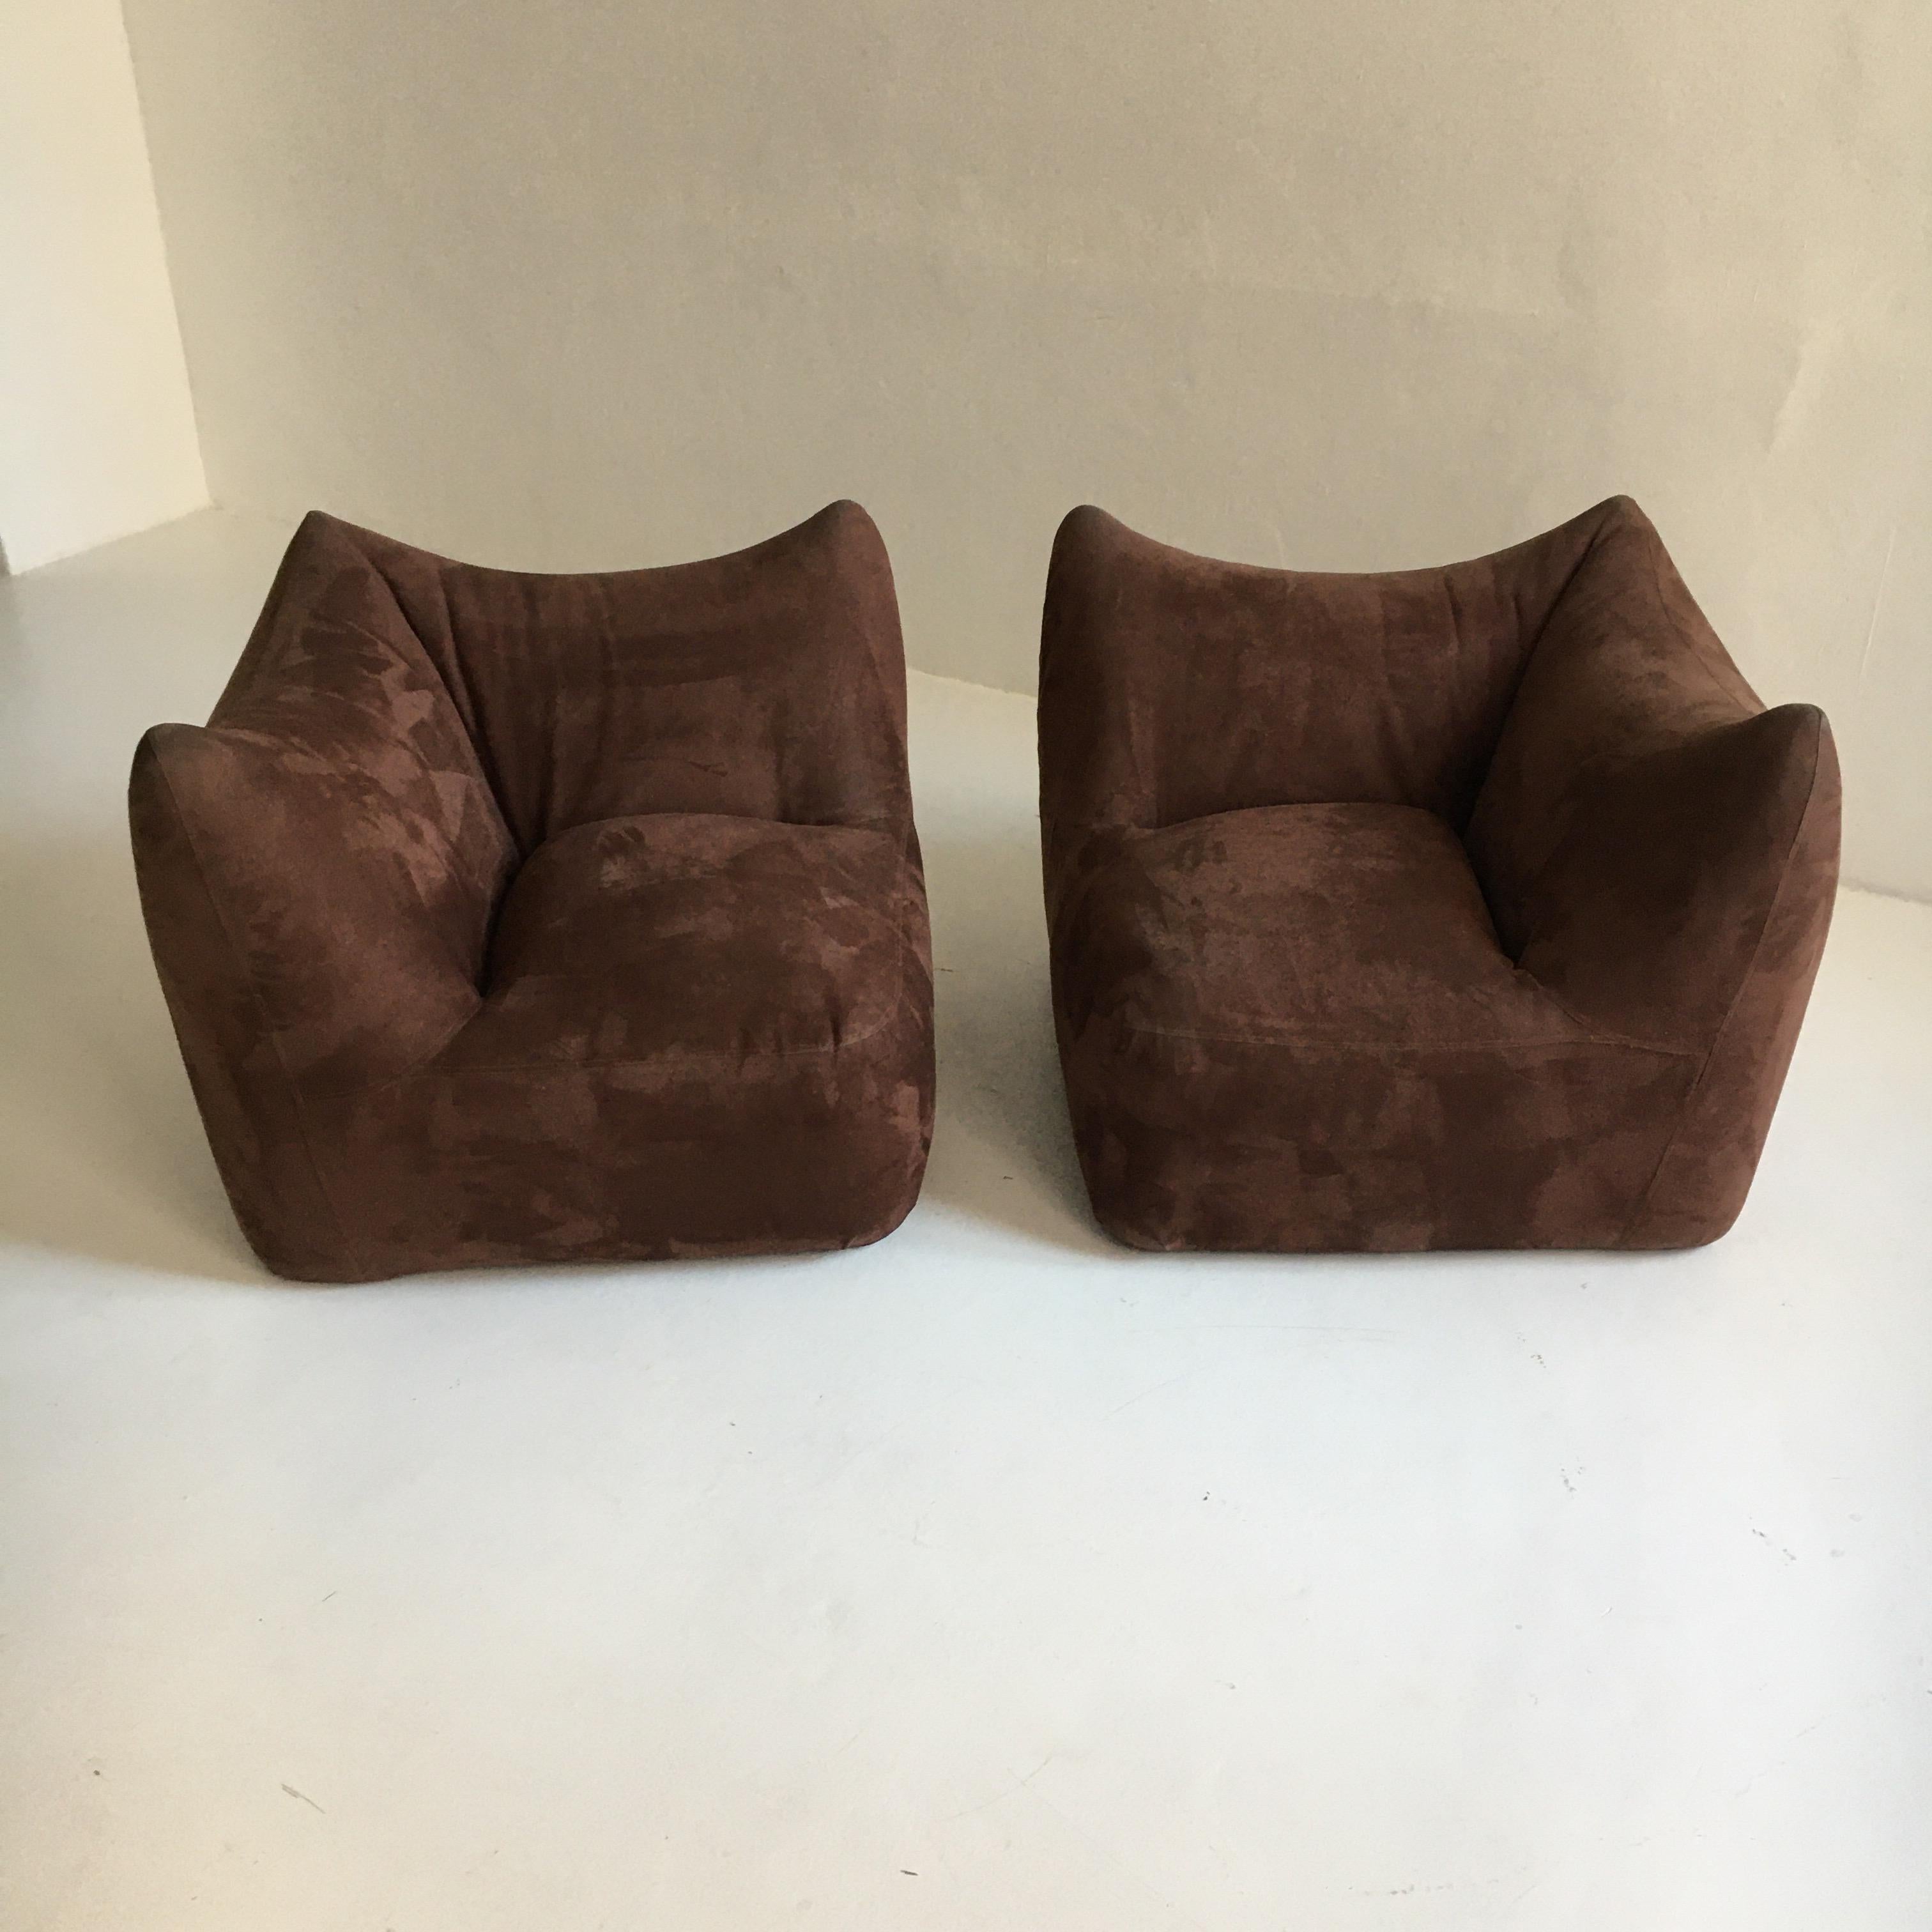 Mario Bellini 'Le Bambole' Two Modular Elements, Pair of Lounge Chairs, Italy 1